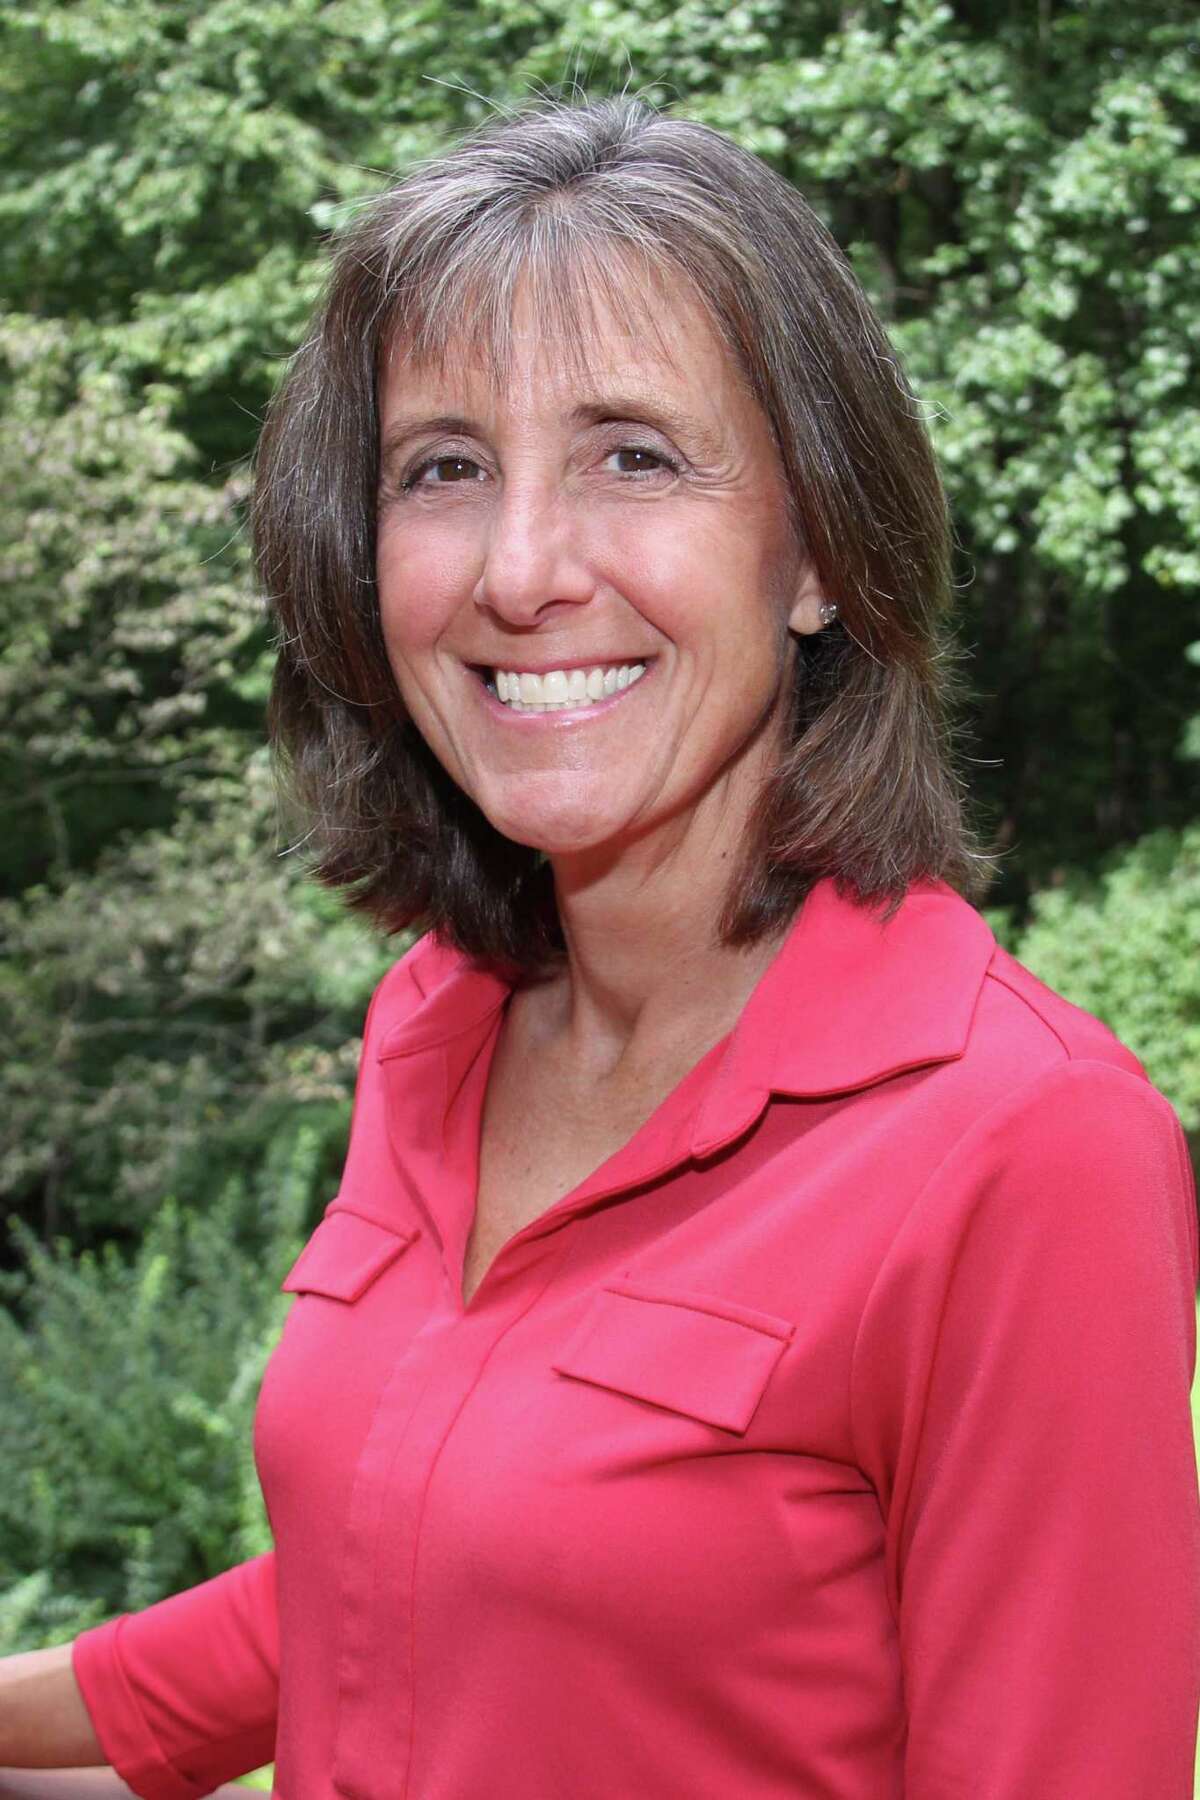 Christina Downey, a member of the Representative Town Meeting for District 5, is one of three Democratic women running for two seats on the Board of Education.